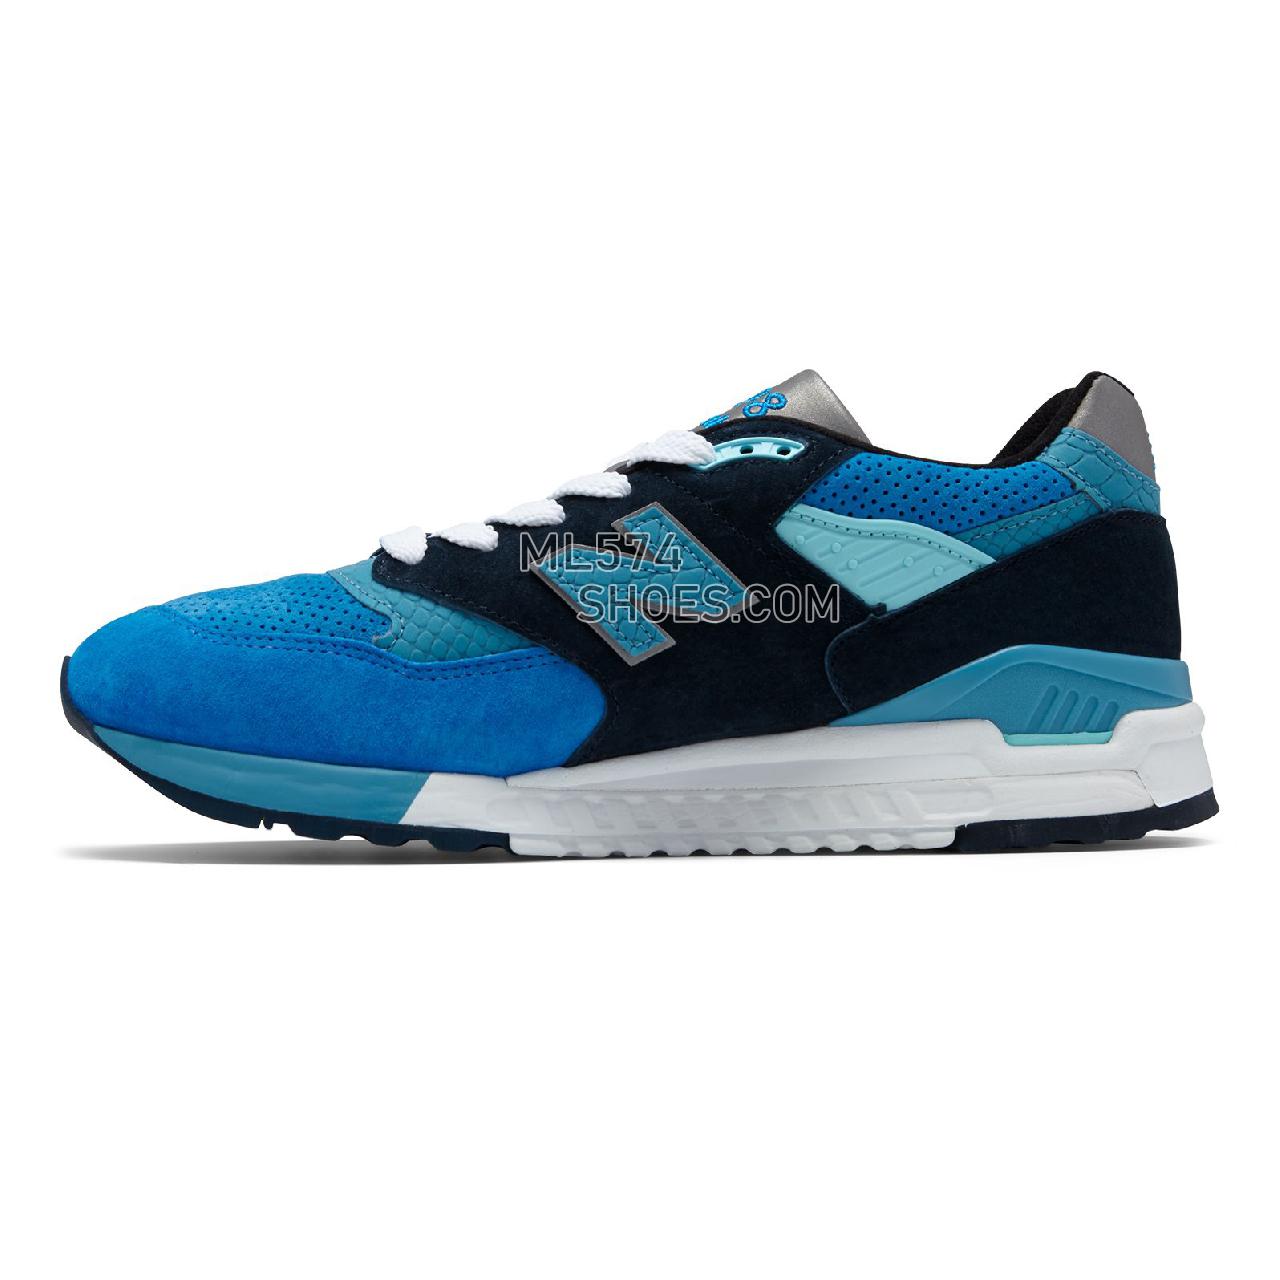 New Balance 998 Made in US - Men's 998 - Classic Blue with Silver - M998NE